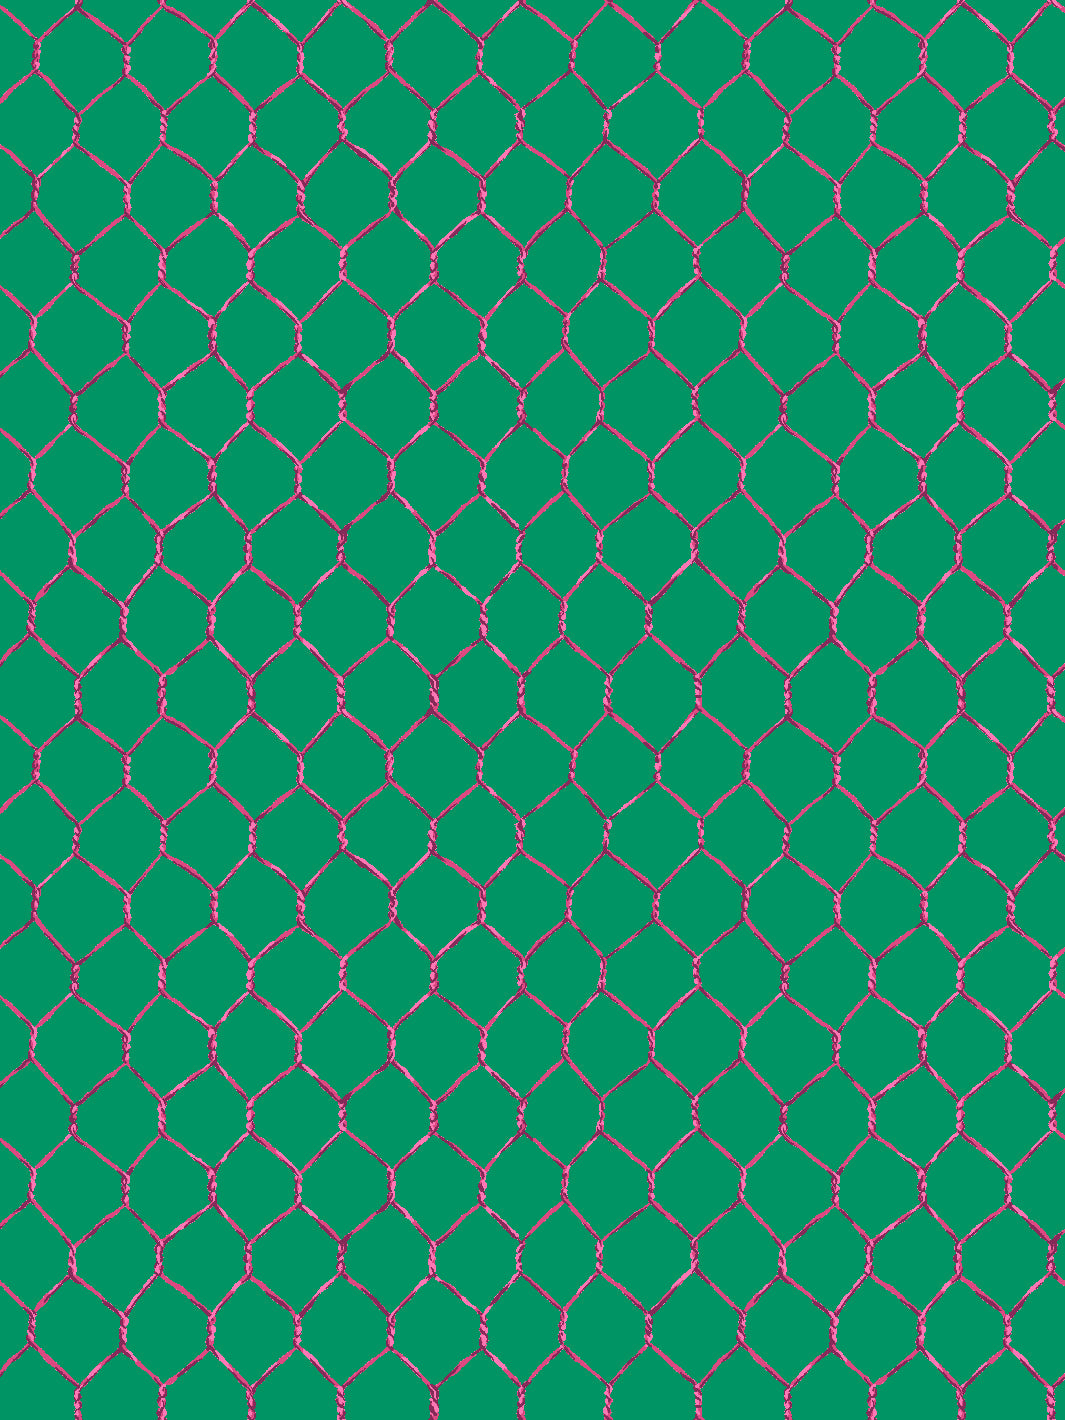 'Evelyn's Chicken Wire' Wallpaper by Sarah Jessica Parker - Raspberry on Emerald